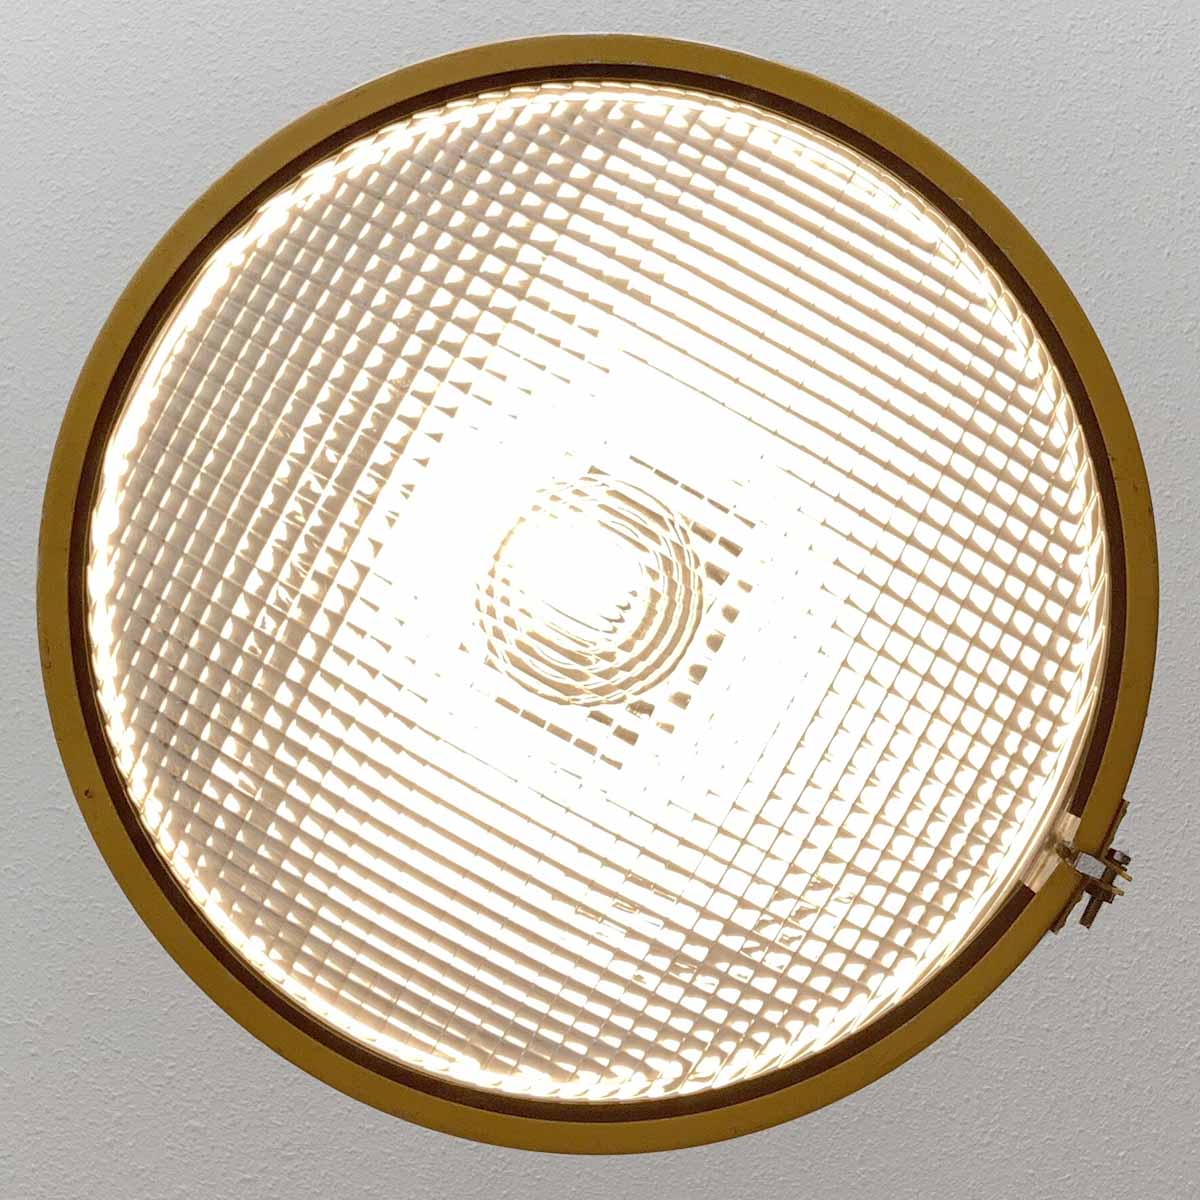 View of the glass of a large Philips runway light, now in use as a ceiling light.